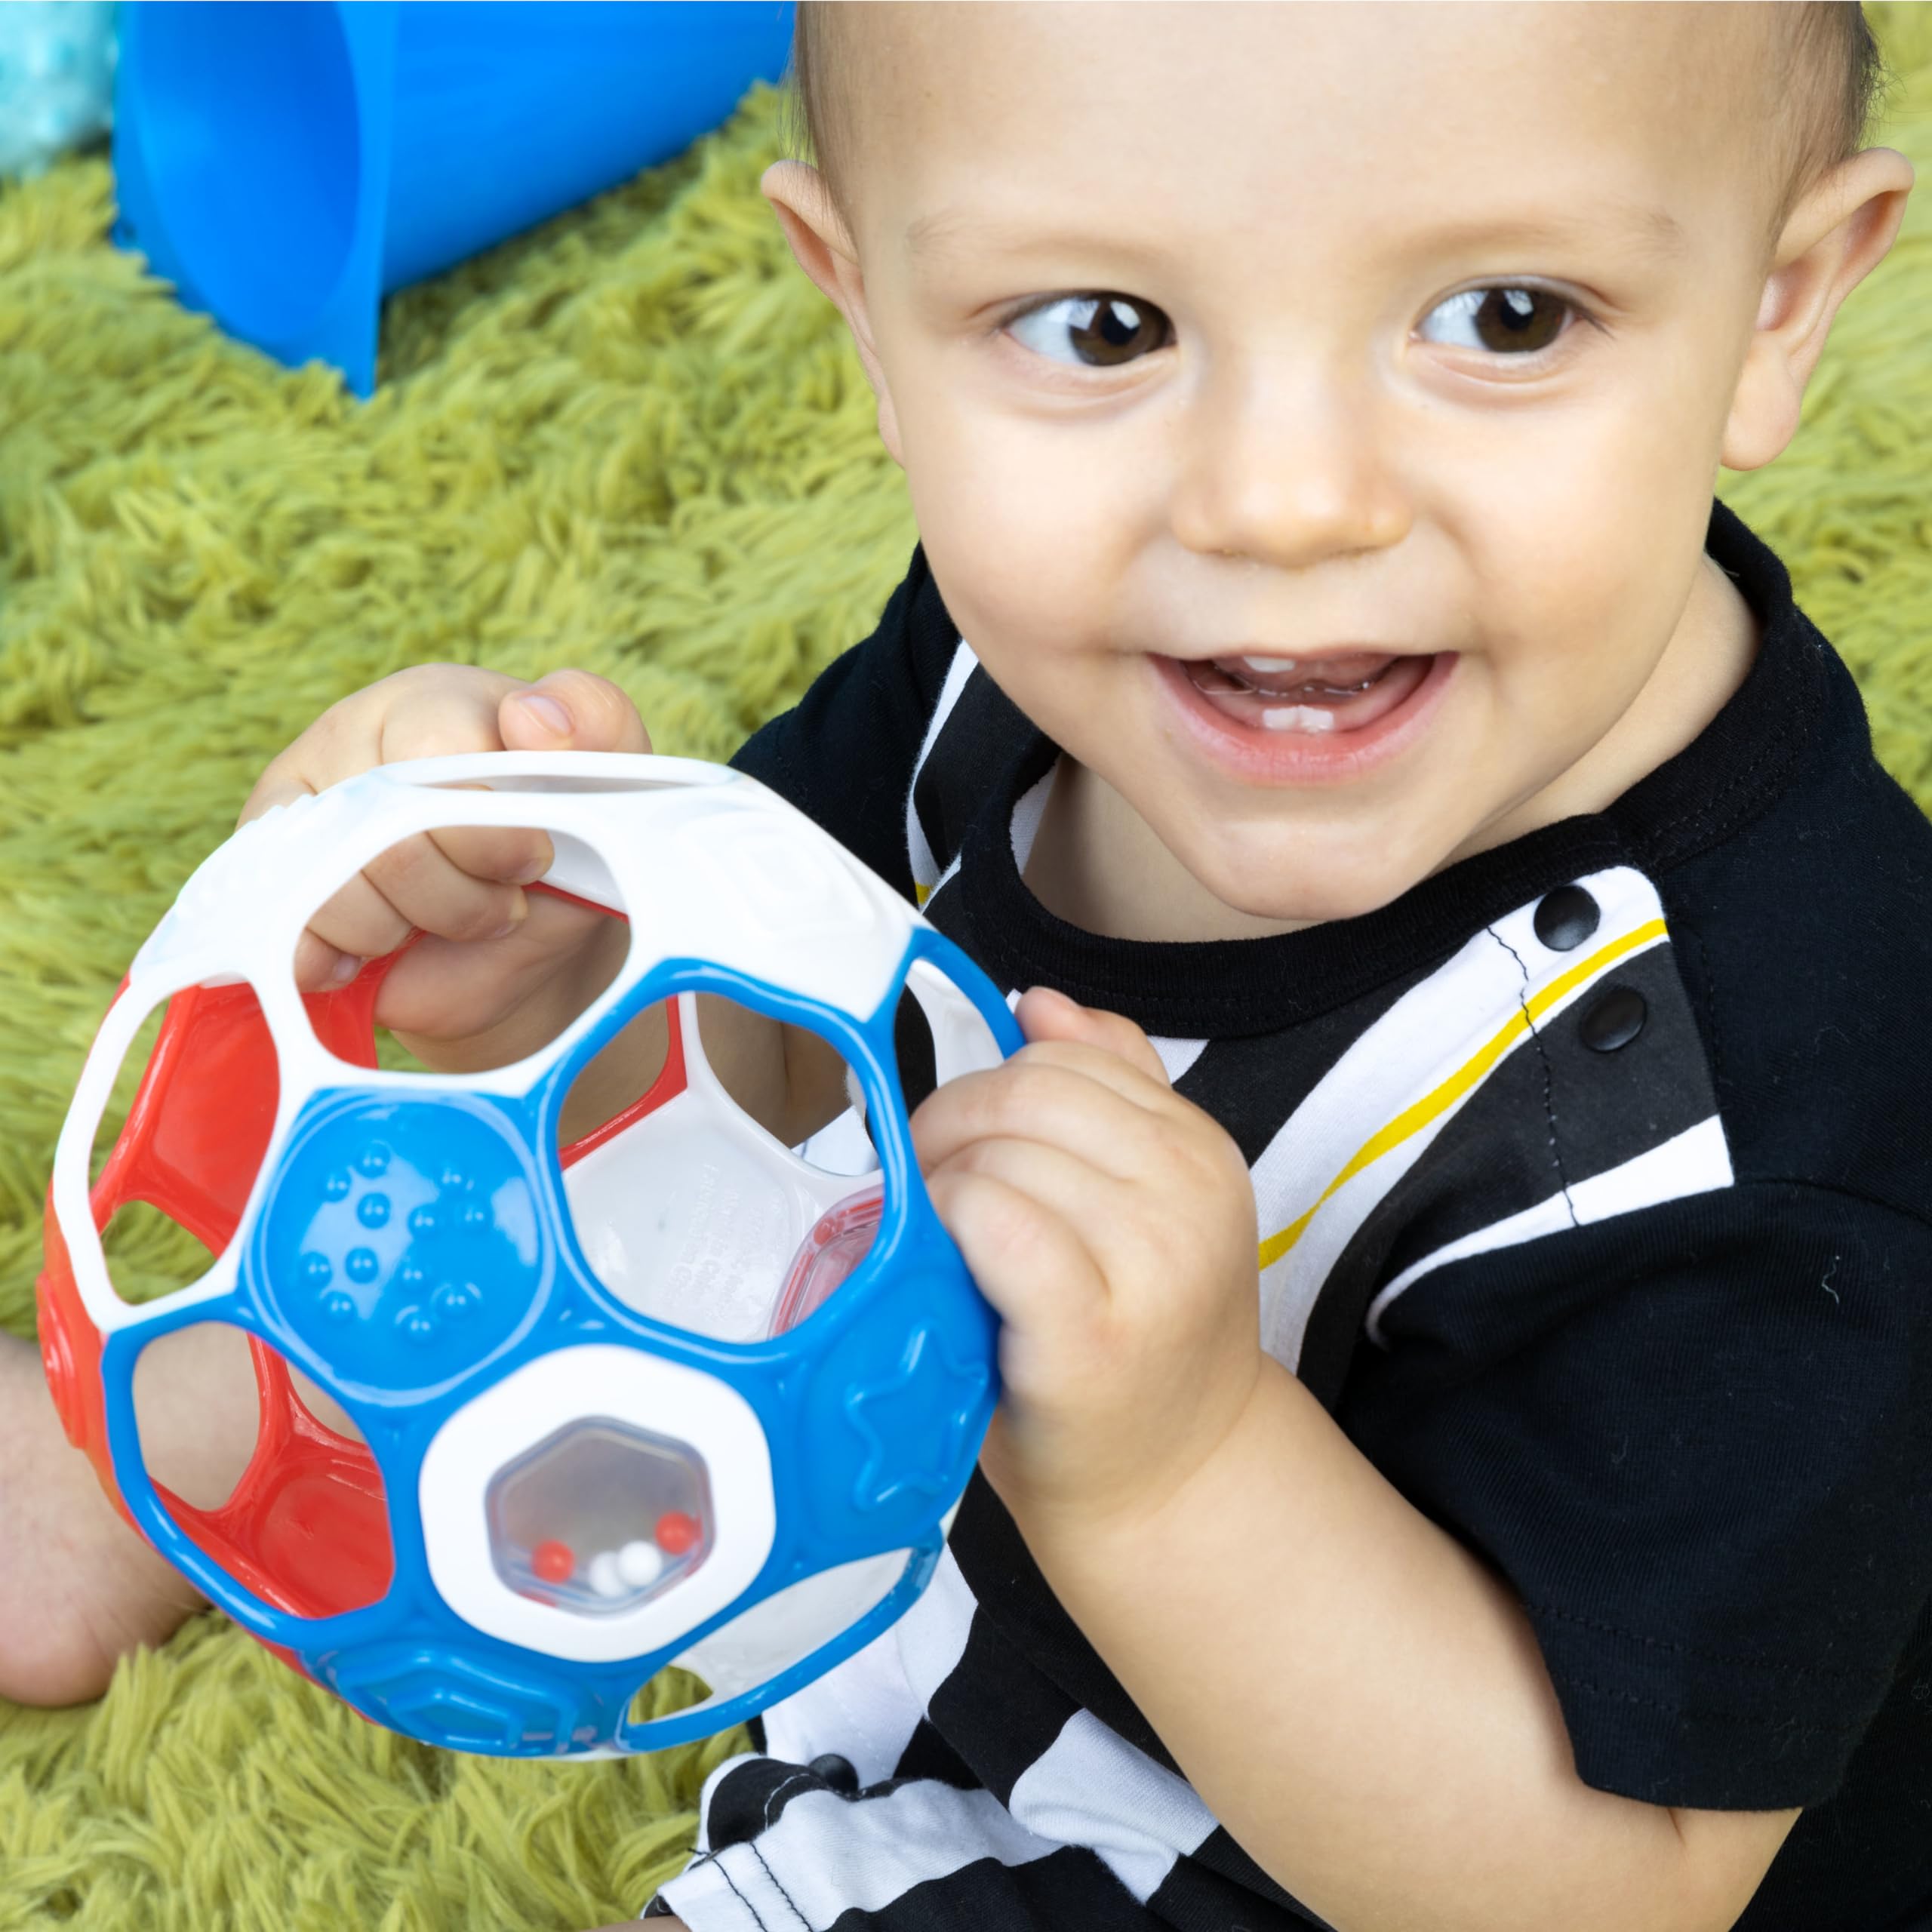 Bright Starts Oball Grippin' Goals Rattle Soccer Ball - Red, White & Blue, Easy-Grasp Toy for Newborn and Up